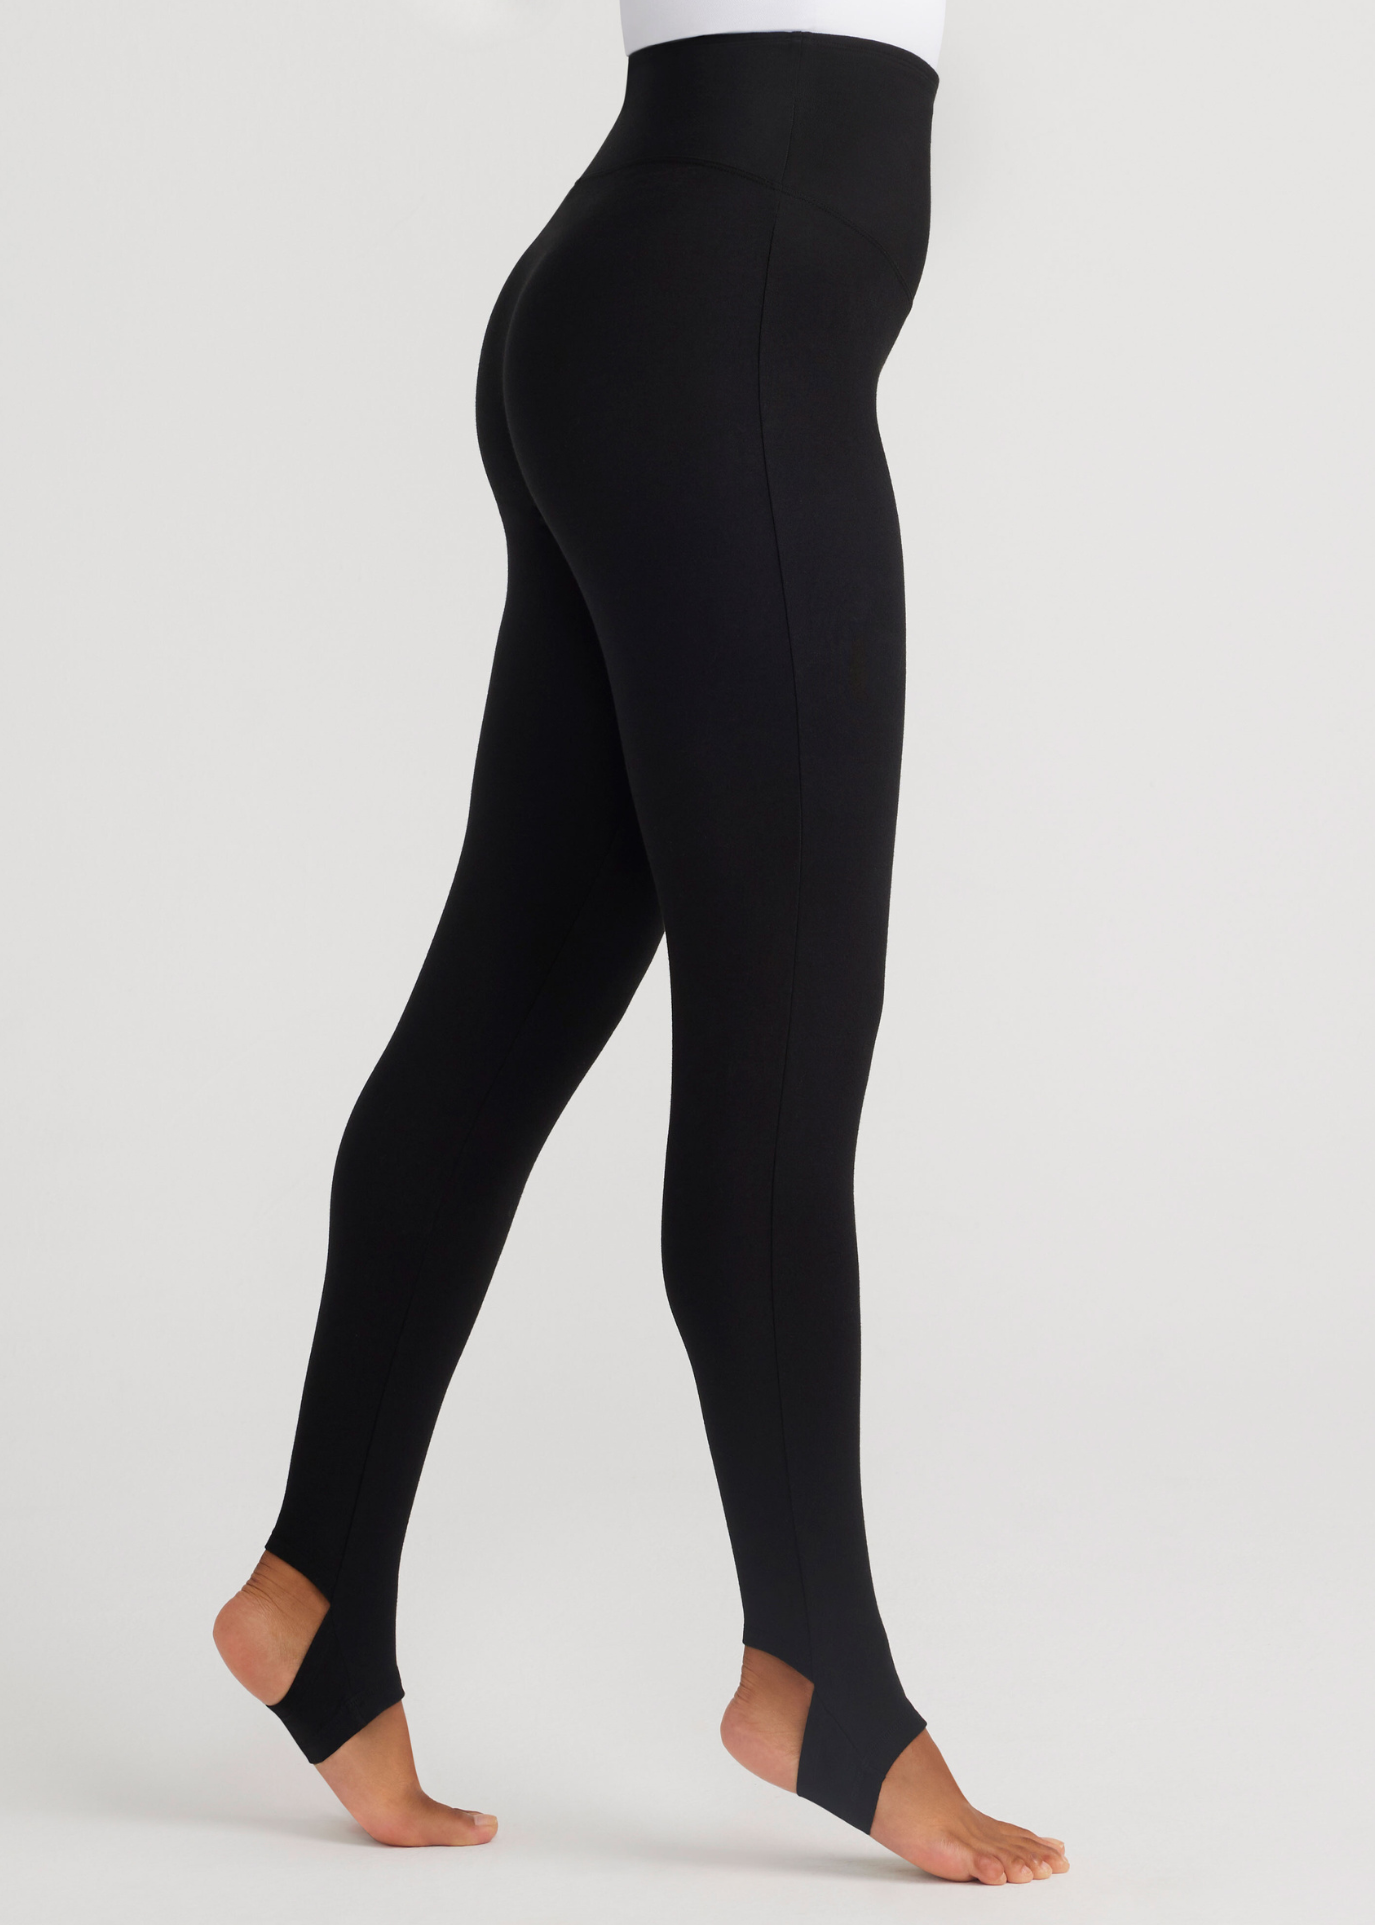 Assets By Spanx Women's Ponte Shaping Flare Leggings - Black L